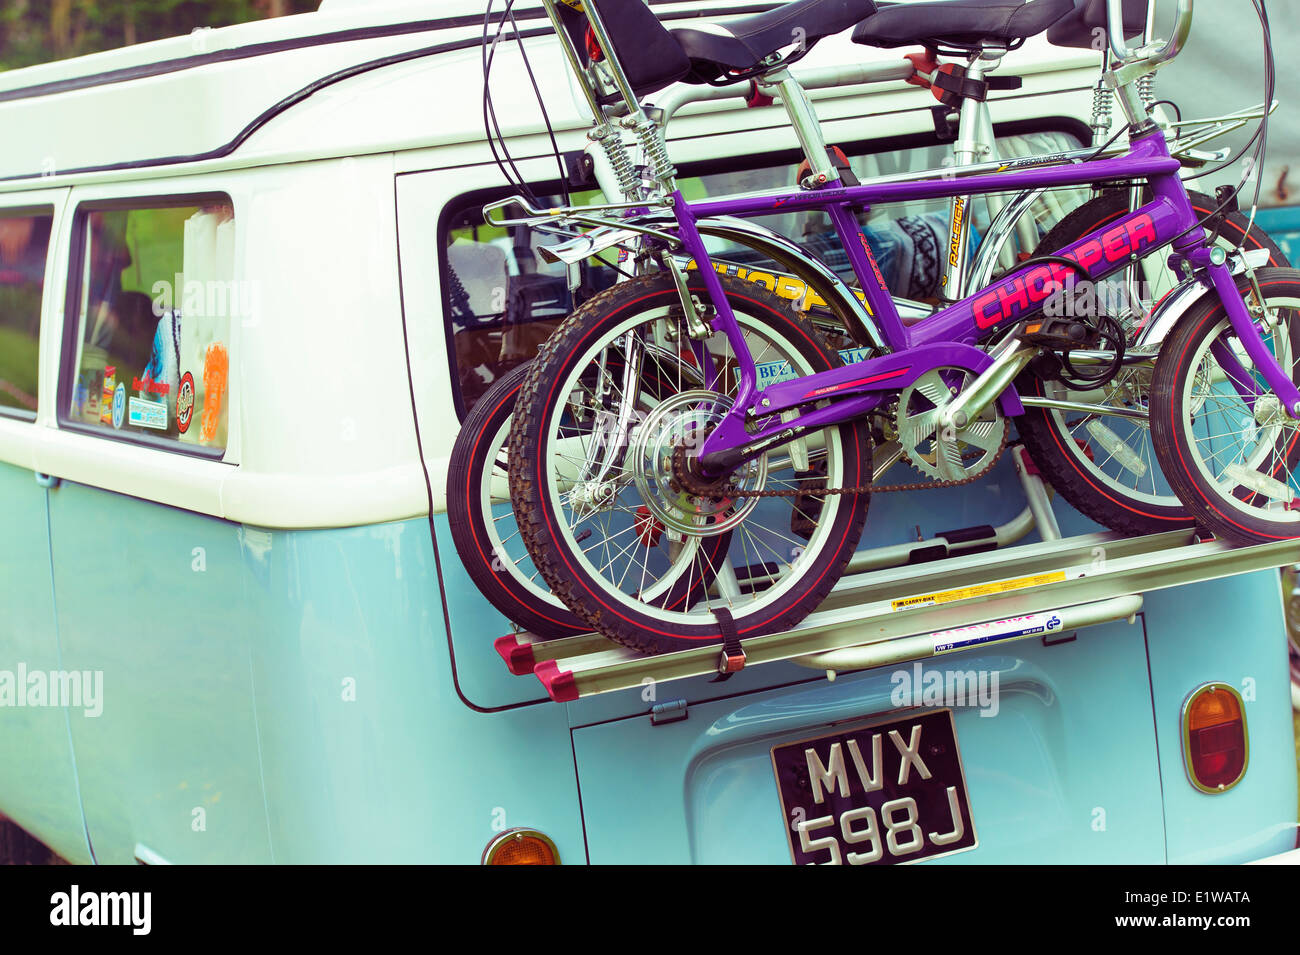 Raleigh Chopper bikes on the rear of a VW Campervan with added nostalgic filter Stock Photo